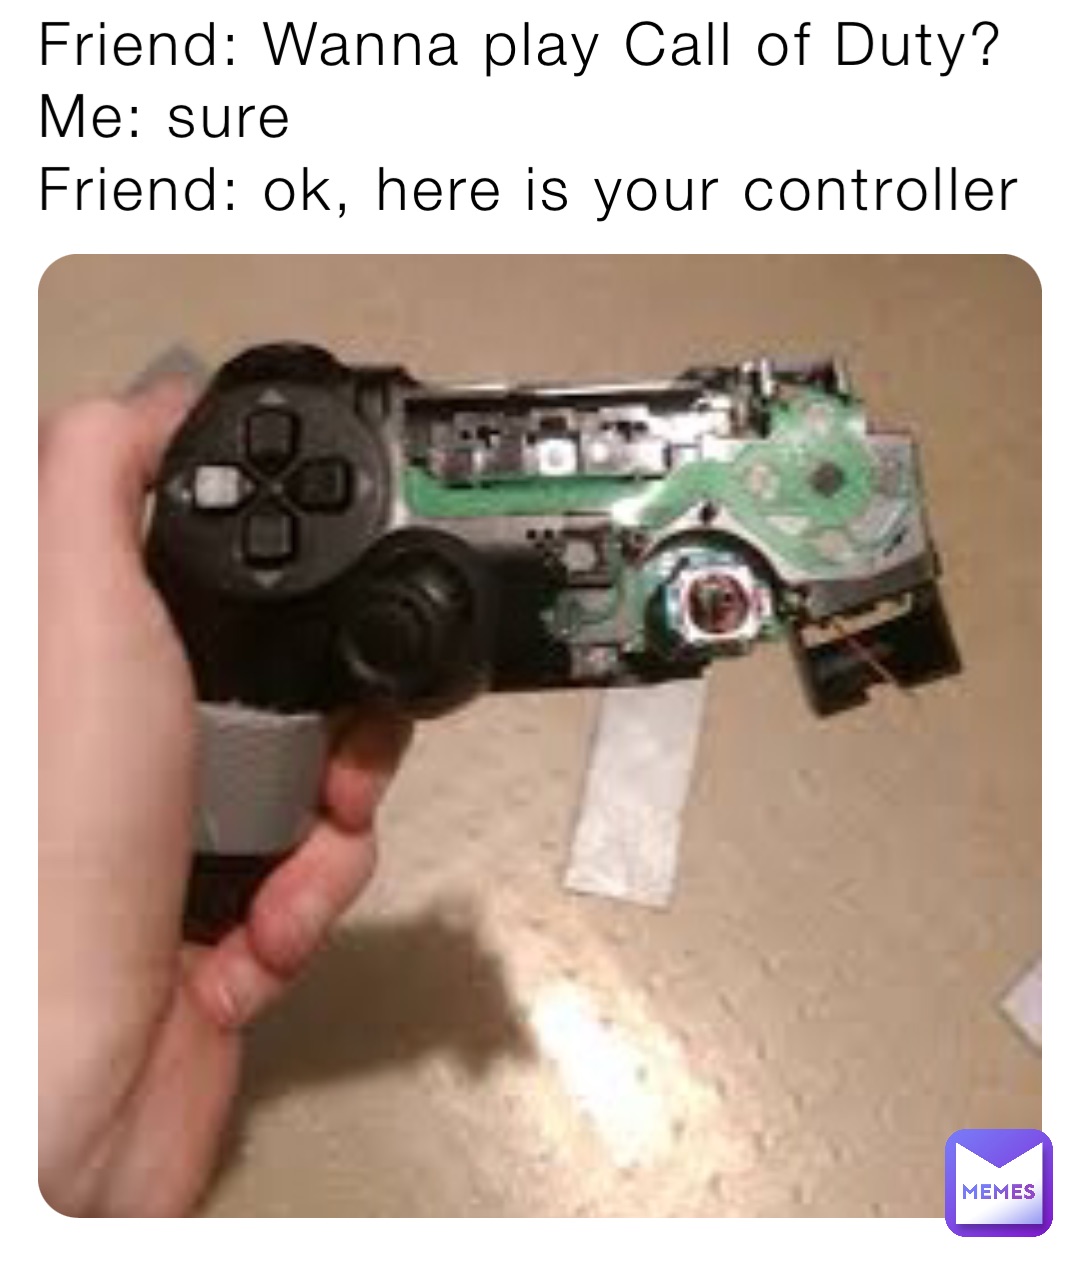 Friend: Wanna play Call of Duty?
Me: sure
Friend: ok, here is your controller